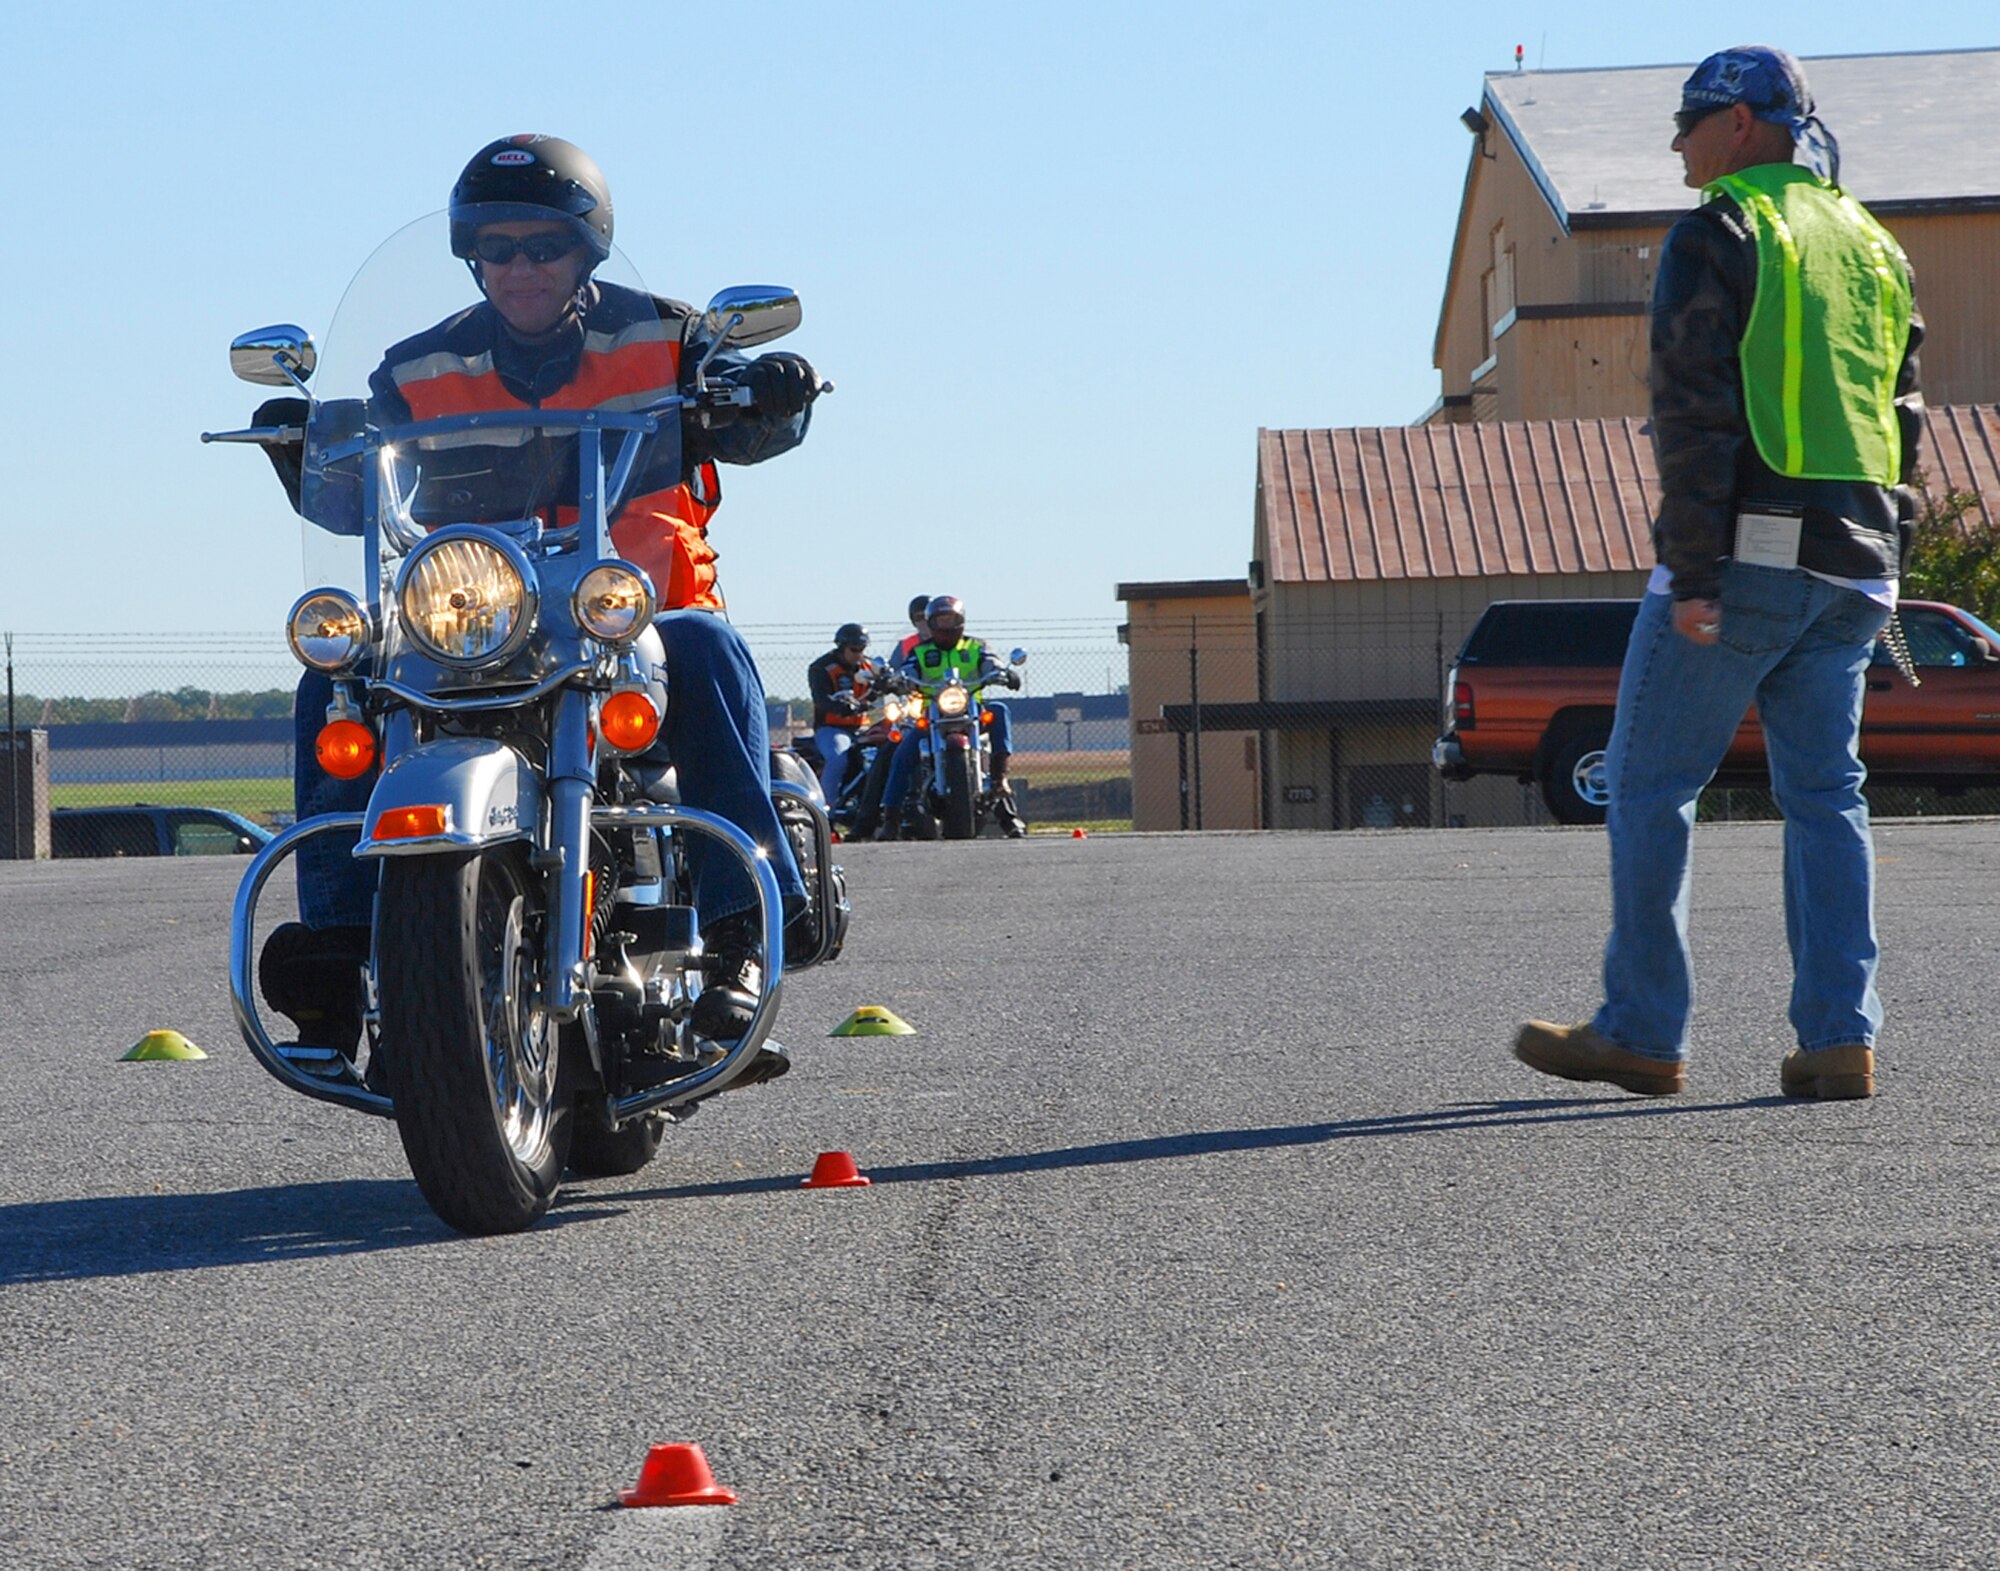 Lieutenant General Philip M. Breedlove, Deputy Chief of Staff for Operations, Plans and Requirements, Headquarters U.S. Air Force, Washington, D.C., rides past an instructor during the Experienced Motorcycle Safety Course here Oct. 16. The course, hosted by the 11th Wing Safety Office, offers a mixture of classroom and hands-on instruction geared toward more advanced riders who own motorcycles.  (U.S. Air Force photo/Senior Airman Amber Russell)